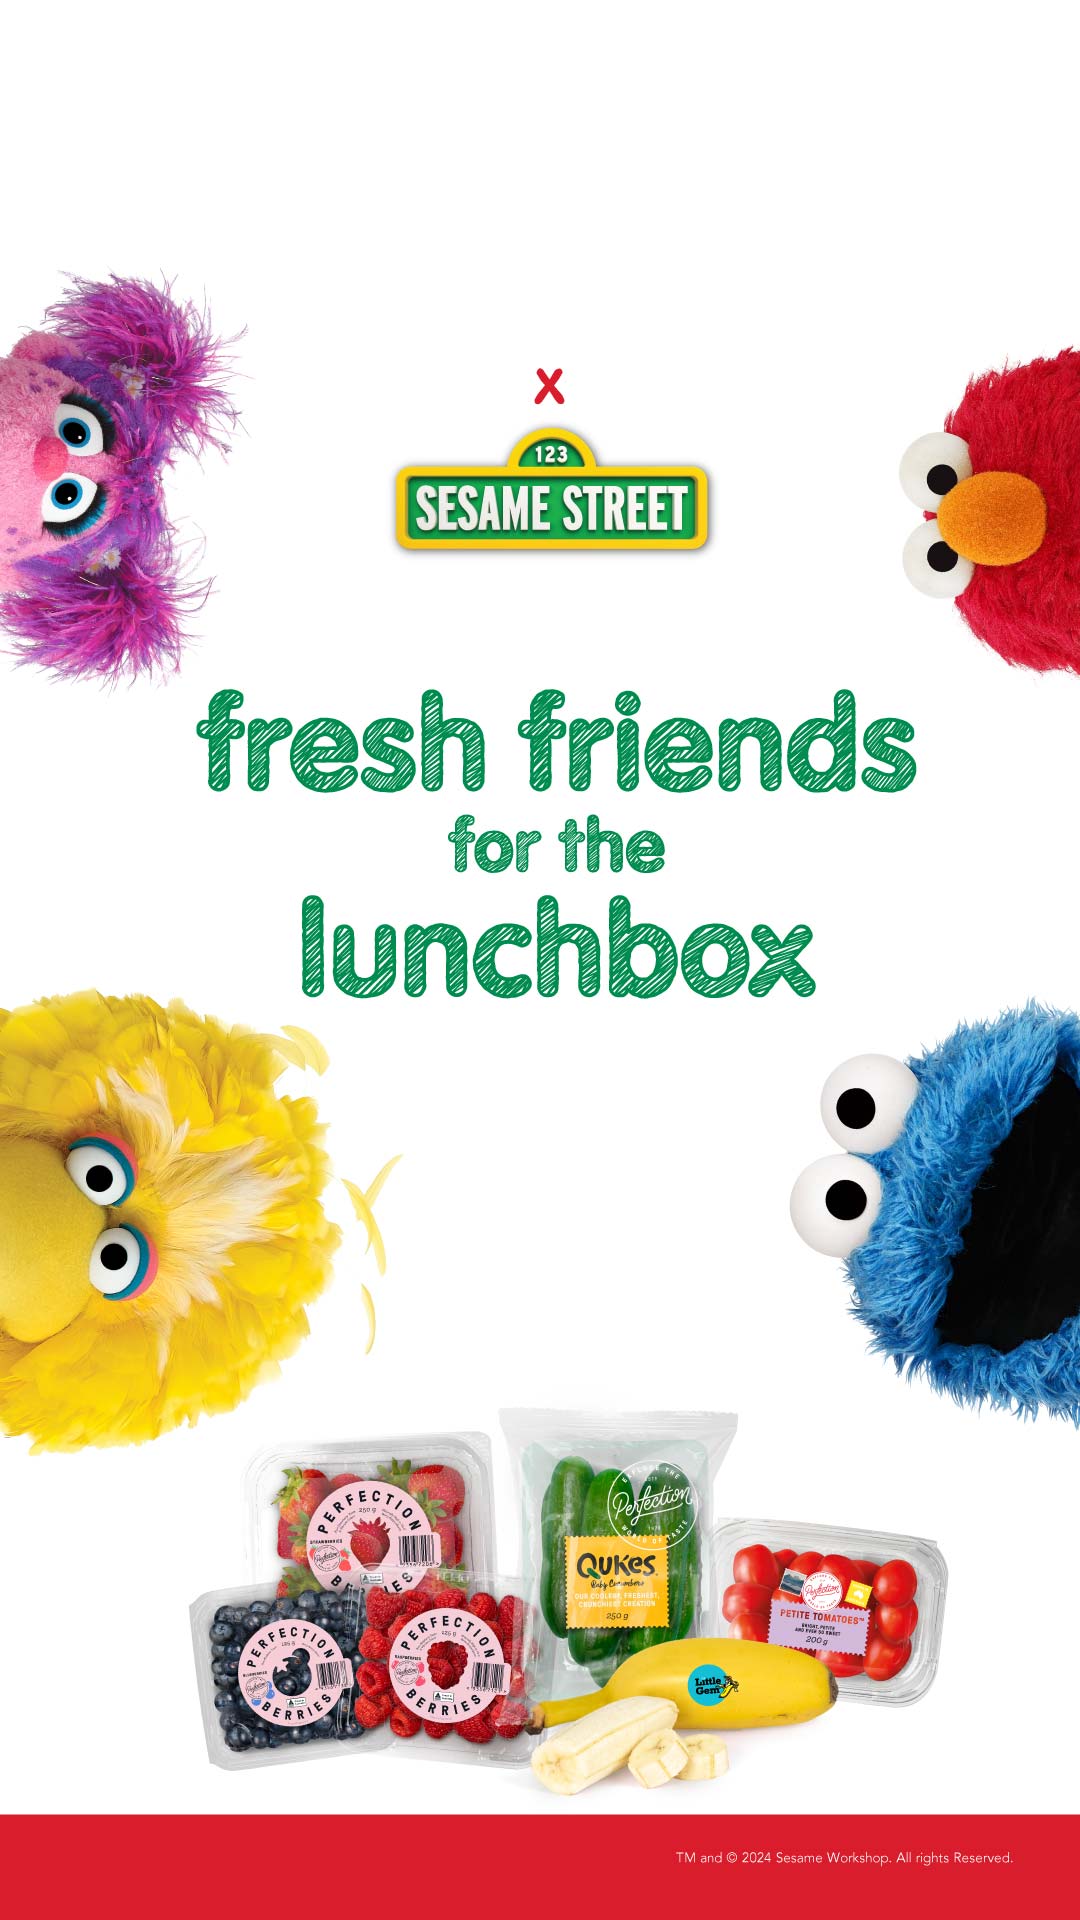 Sesame Street and Perfection - fresh friends for the lunchbox